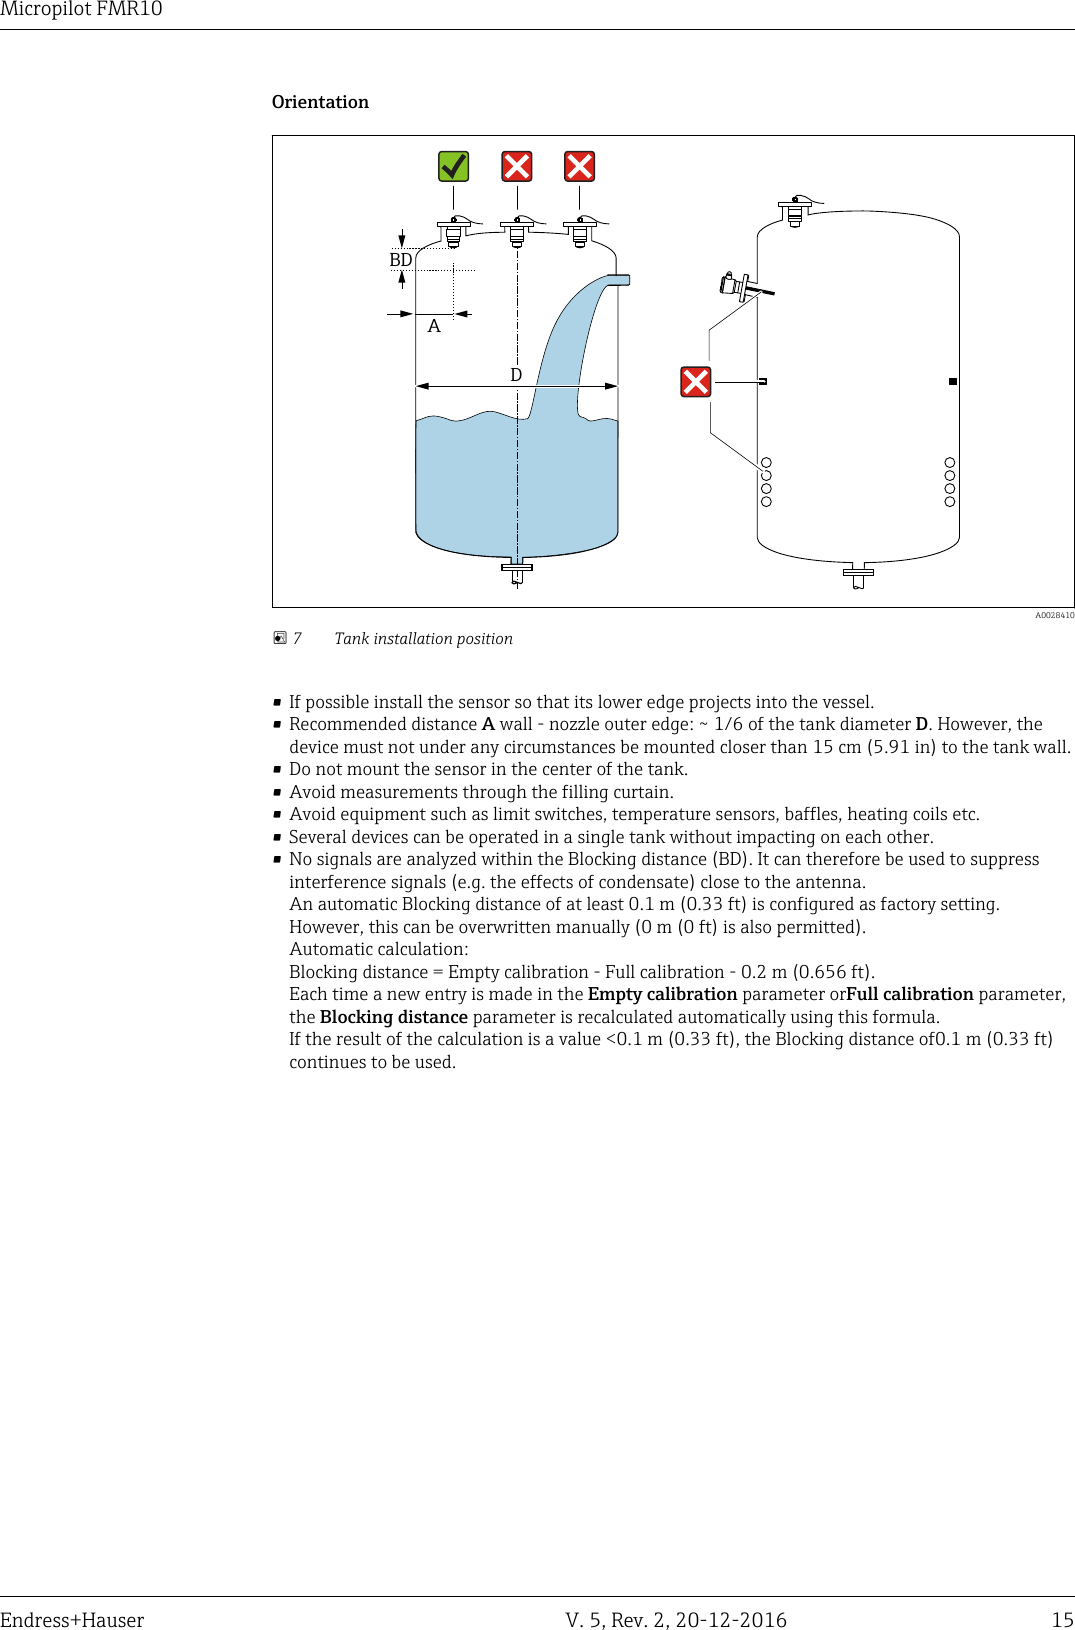 Micropilot FMR10Endress+Hauser V. 5, Rev. 2, 20-12-2016 15OrientationABDD  A0028410 7 Tank installation position• If possible install the sensor so that its lower edge projects into the vessel.• Recommended distance A wall - nozzle outer edge: ~ 1/6 of the tank diameter D. However, thedevice must not under any circumstances be mounted closer than 15 cm (5.91 in) to the tank wall.• Do not mount the sensor in the center of the tank.• Avoid measurements through the filling curtain.• Avoid equipment such as limit switches, temperature sensors, baffles, heating coils etc.• Several devices can be operated in a single tank without impacting on each other.• No signals are analyzed within the Blocking distance (BD). It can therefore be used to suppressinterference signals (e.g. the effects of condensate) close to the antenna.An automatic Blocking distance of at least 0.1 m (0.33 ft) is configured as factory setting.However, this can be overwritten manually (0 m (0 ft) is also permitted).Automatic calculation:Blocking distance = Empty calibration - Full calibration - 0.2 m (0.656 ft).Each time a new entry is made in the Empty calibration parameter orFull calibration parameter,the Blocking distance parameter is recalculated automatically using this formula.If the result of the calculation is a value &lt;0.1 m (0.33 ft), the Blocking distance of0.1 m (0.33 ft)continues to be used.